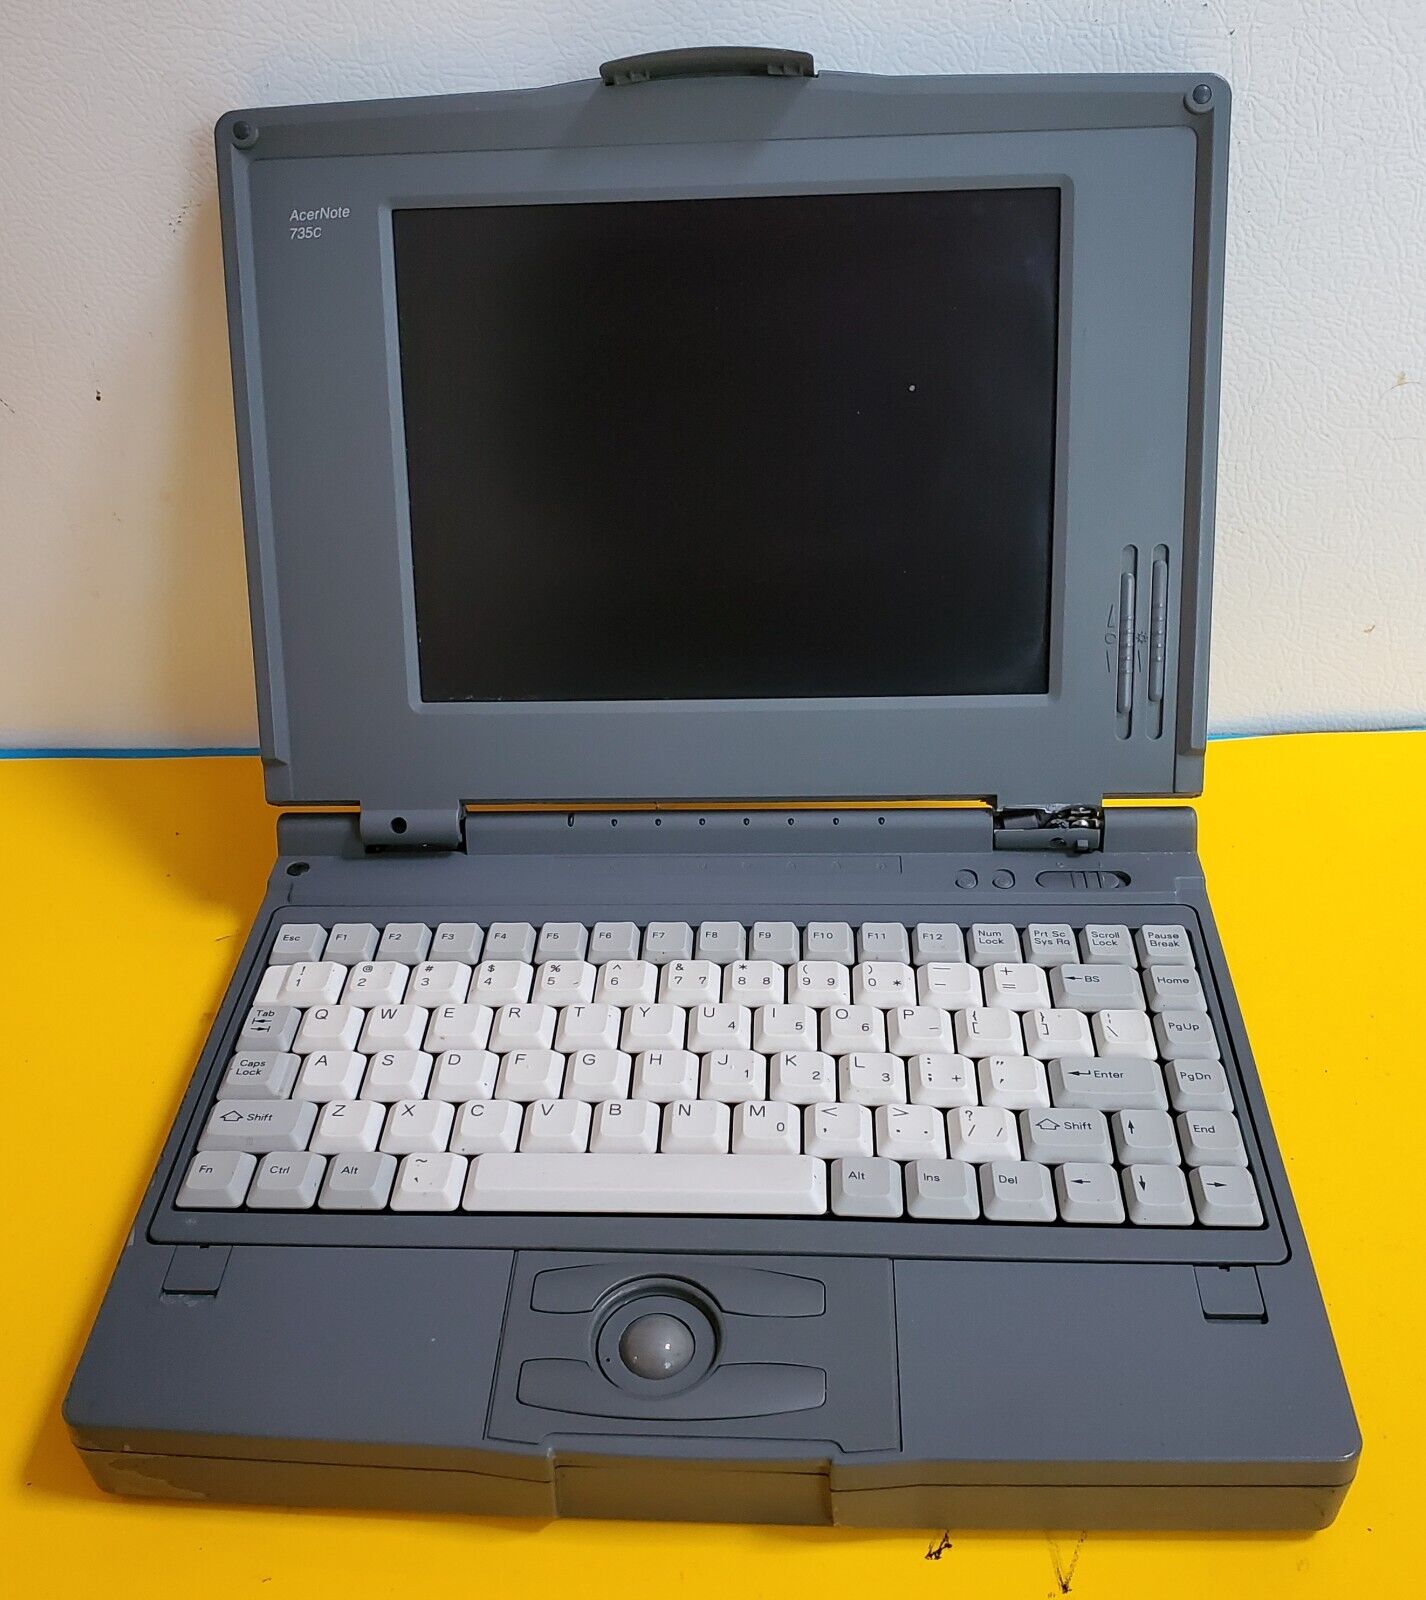 RARE Vintage Acer Laptop Acernote 735C Retro Laptop Computer Untested Sold As is